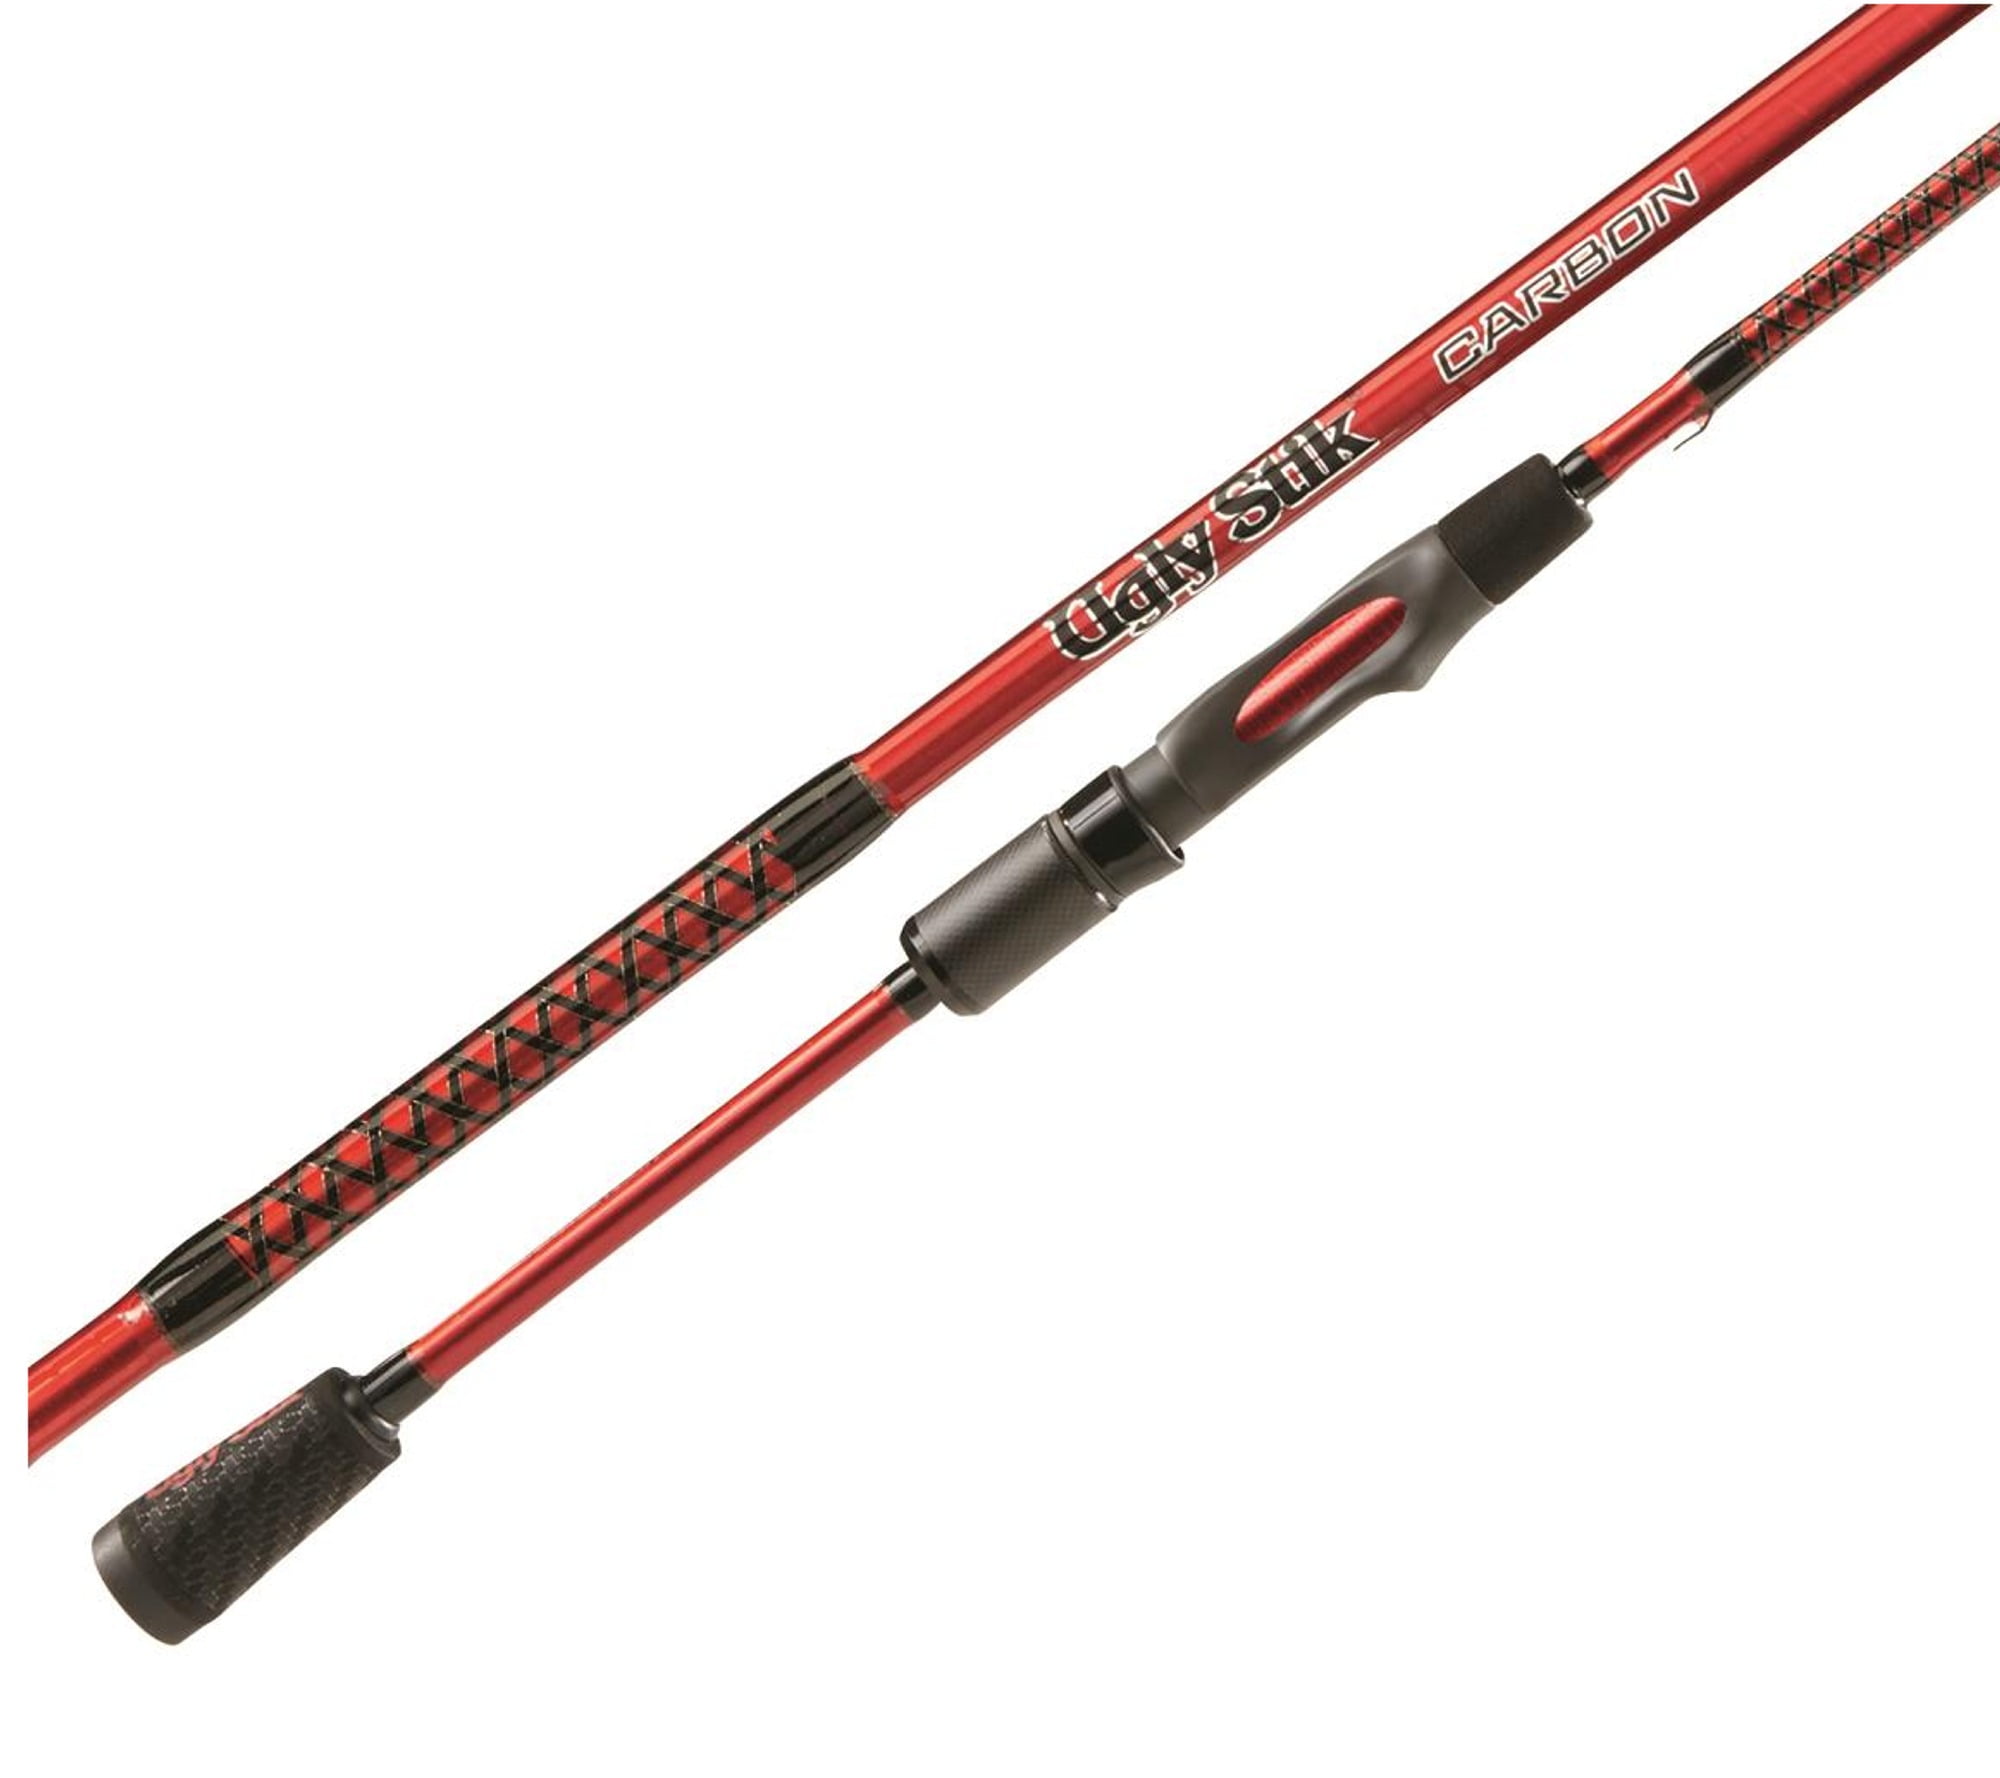 Shakespeare Conquest Carbon Spinning Rod Light Weight 6 Ft Spinning Rod Spin Rod 